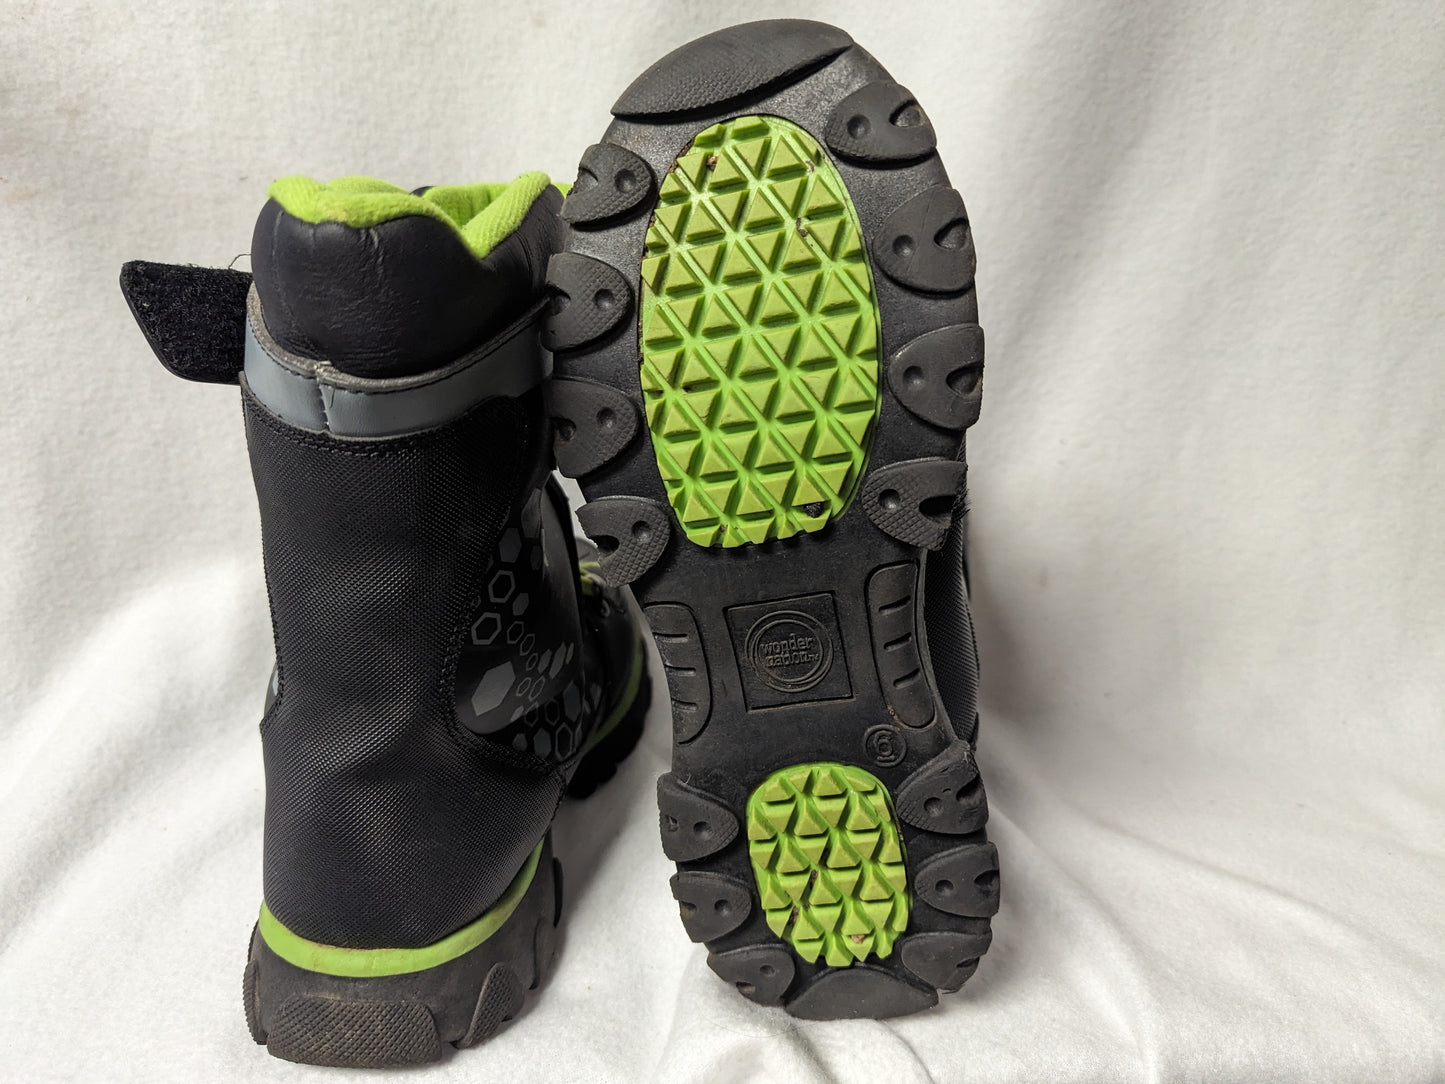 Wonder Nation Insulated Waterproof Hiking Boots Size 6 Color Black Condition Used